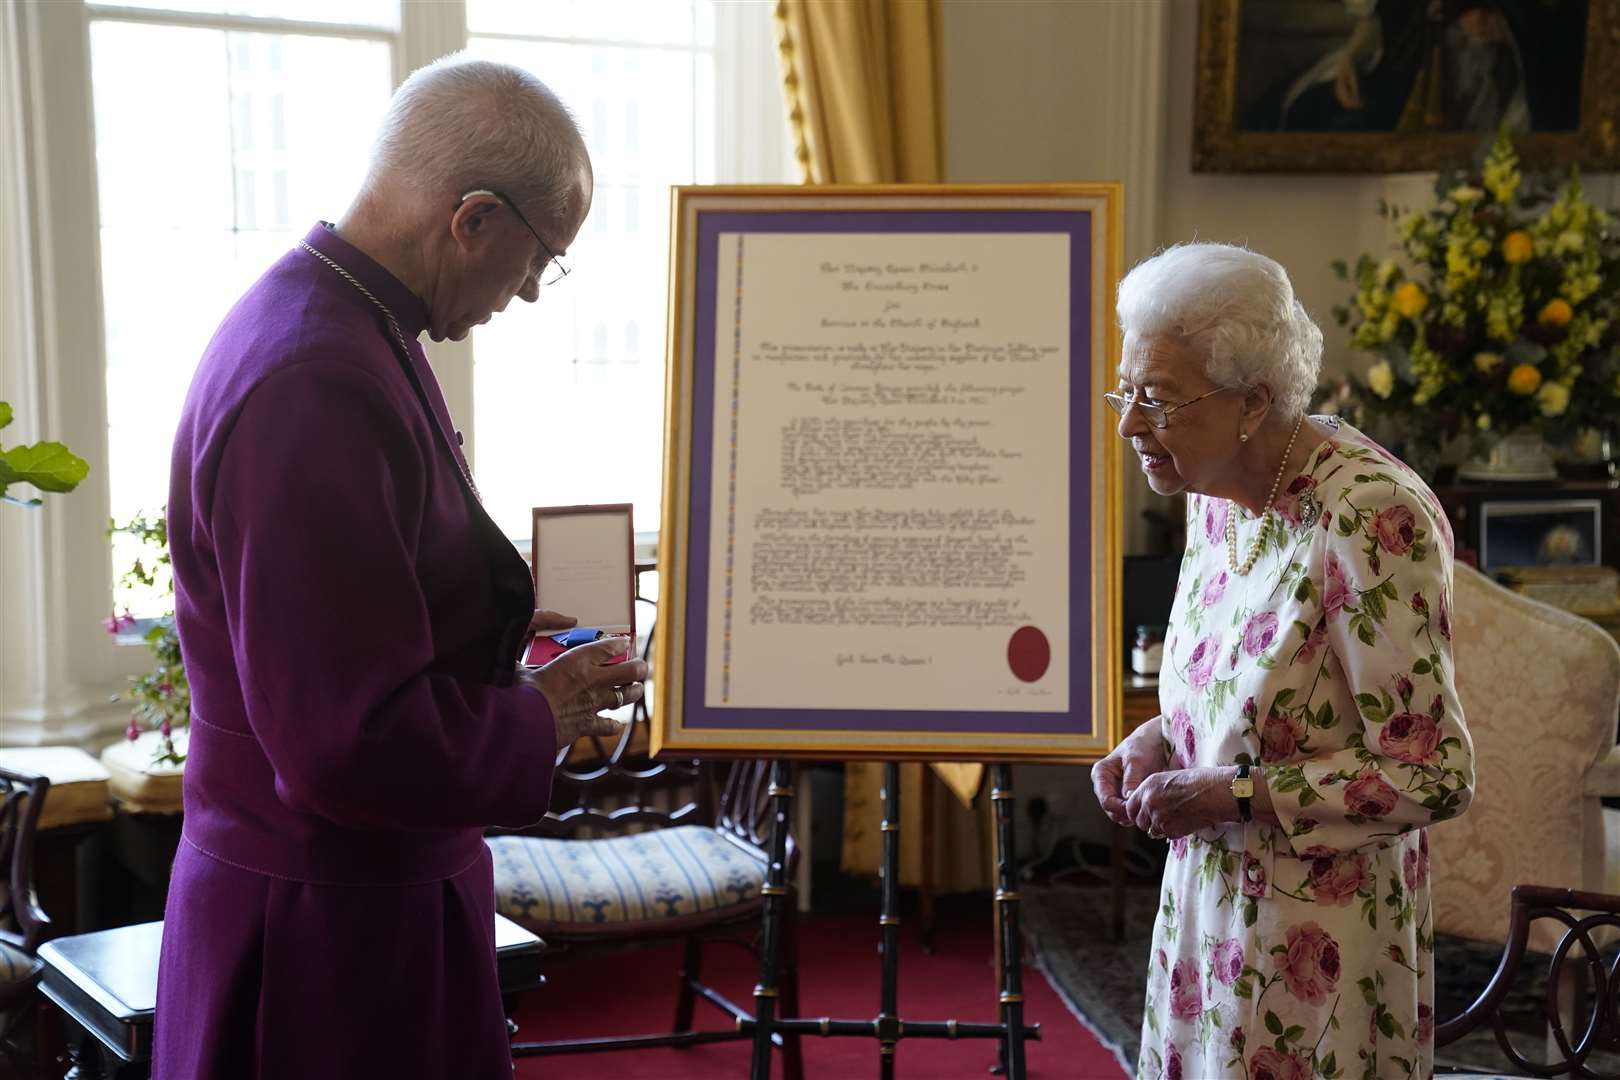 The Queen receives the Archbishop of Canterbury to receive a special ‘Canterbury Cross’ for her ‘unstinting’ service to the Church of England (Andrew Matthews/PA)